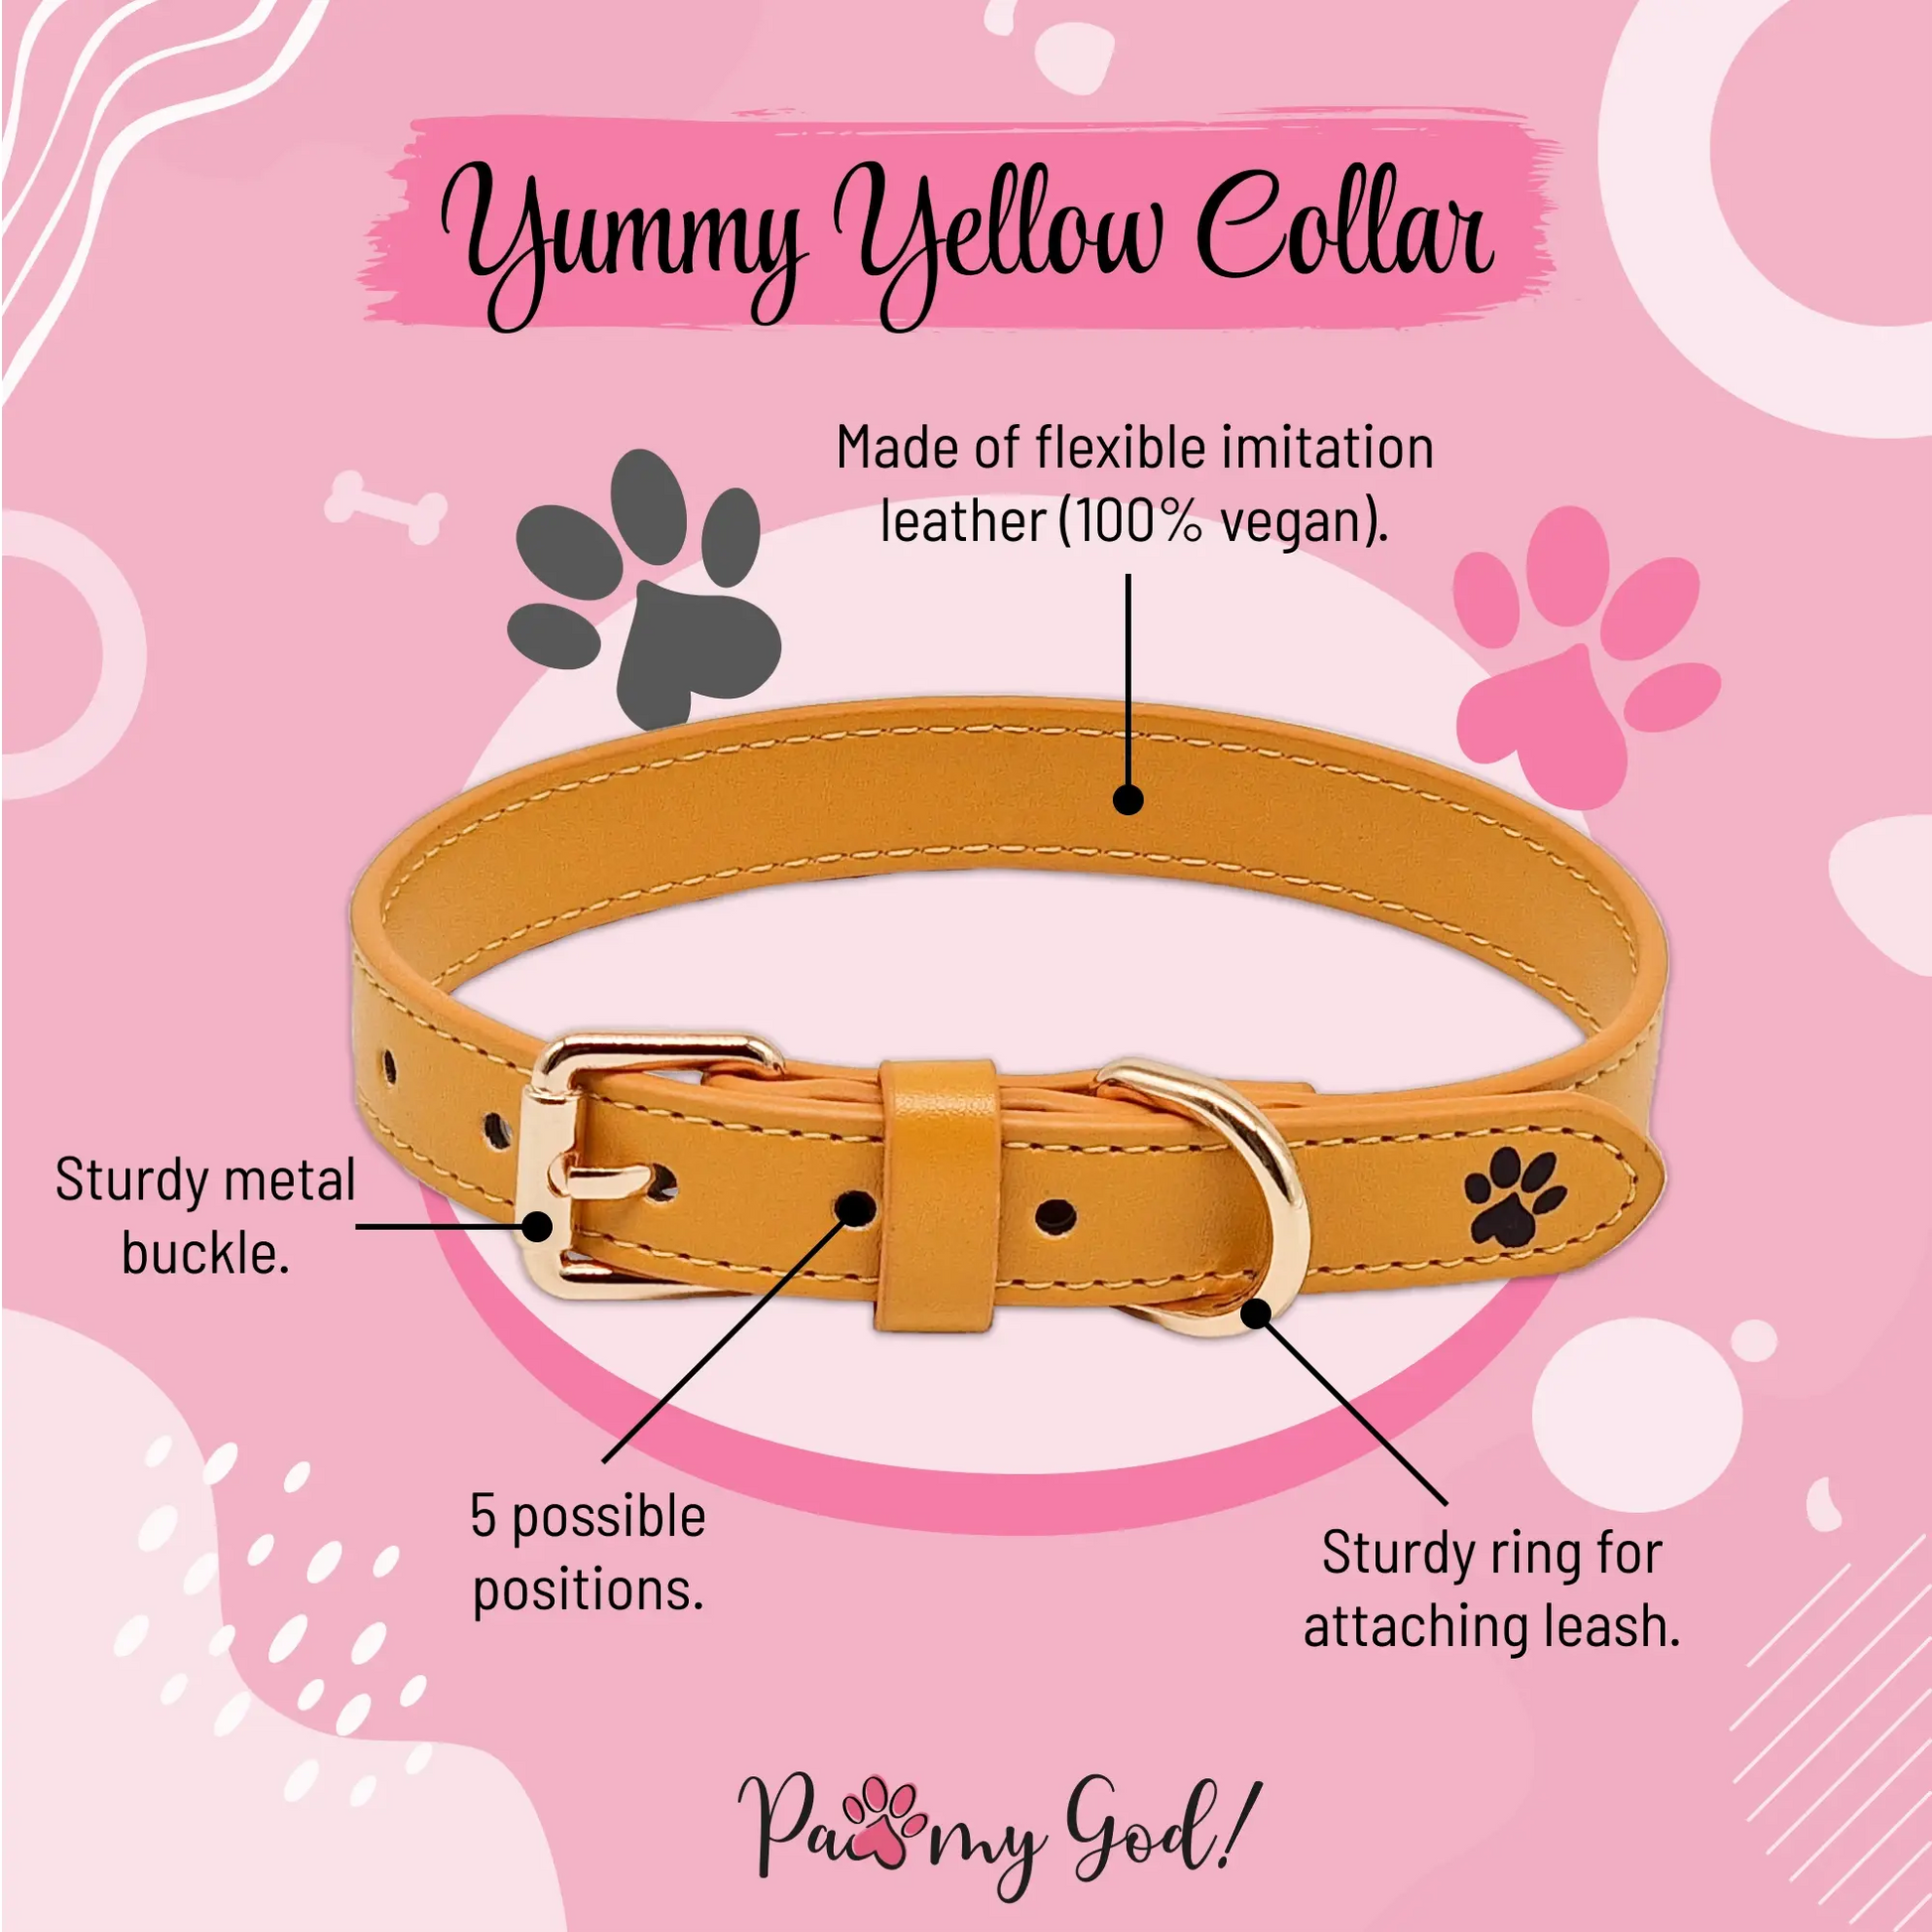 Yummy Yellow Leather Collar Features